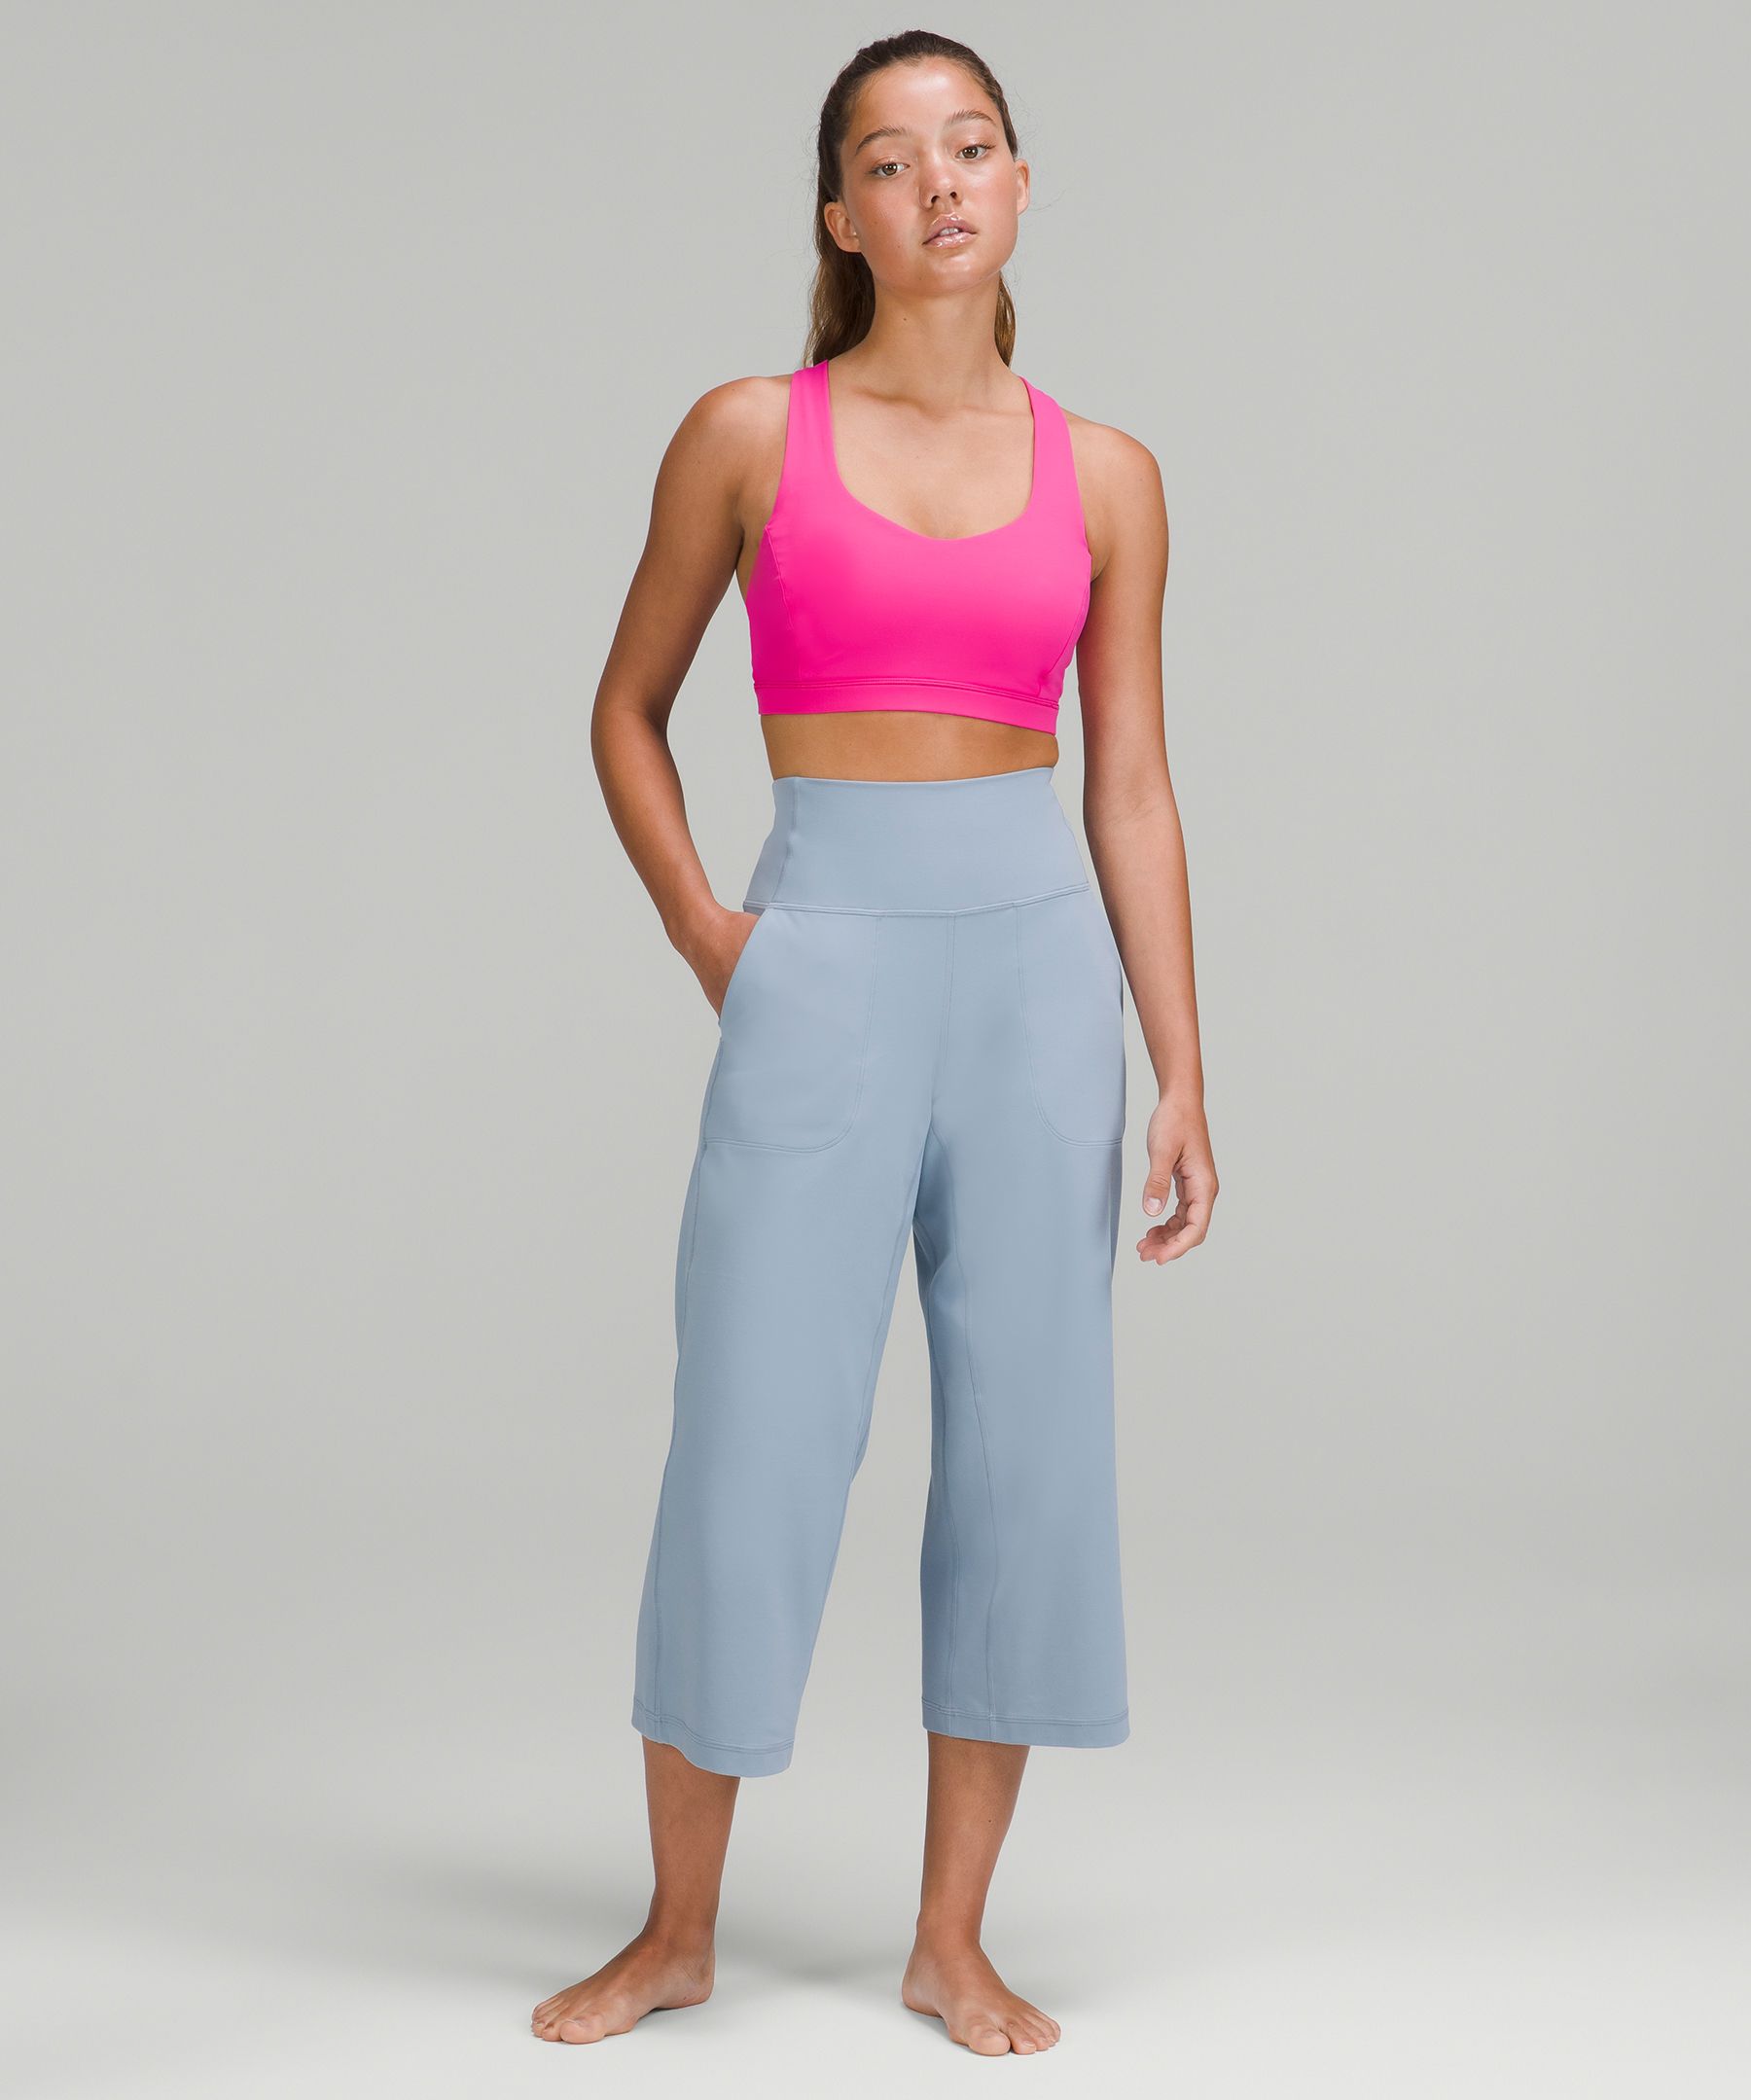 Free To Be Serene sports bra in Kaleidoscopic Pink Multi is so versatile!  I've worn it with many Align colors already. Doubled lined Align 25” in  Lavender Dew. : r/lululemon